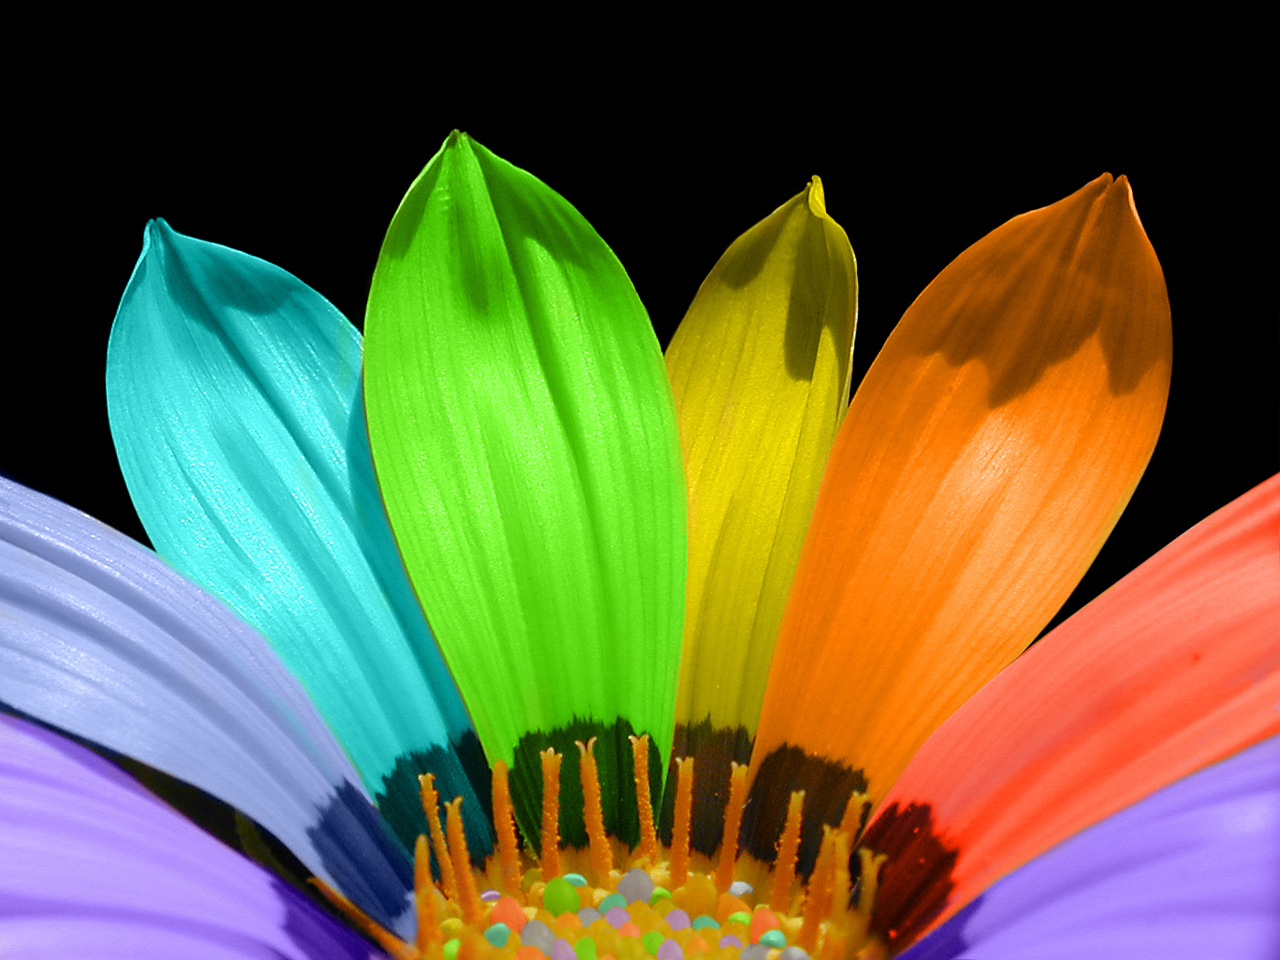 Why are flowers brightly colored?